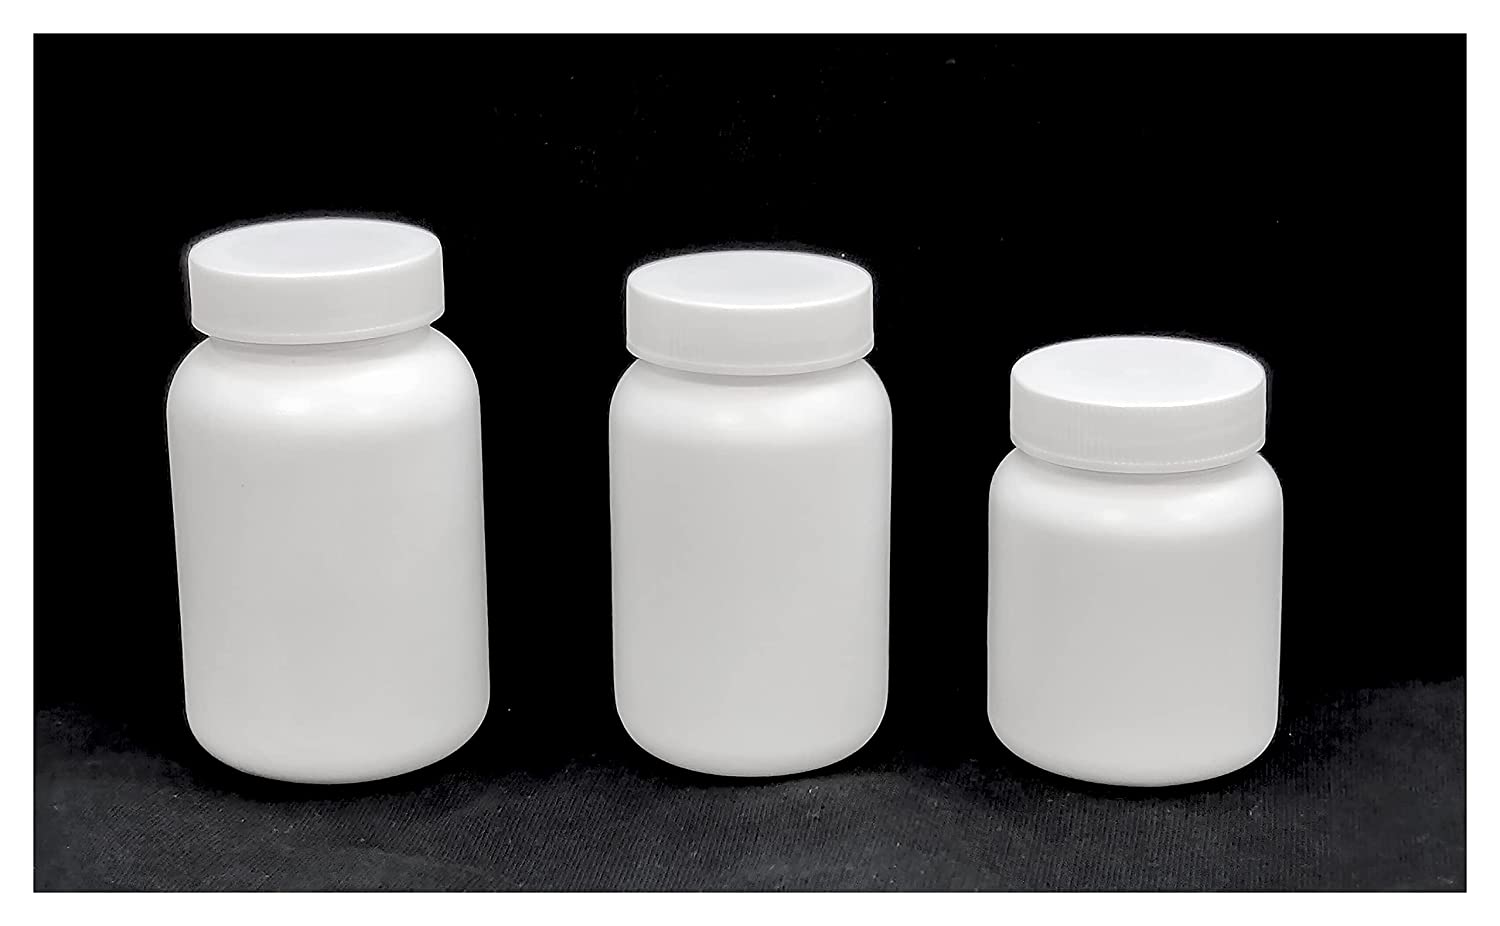 85ml White HDPE Empty Bottle for Secure Storage., Patco Pharma, HPMC capsules, 85ml-white-hdpe-empty-bottle-for-capsules-tablets-for-ayurvedic-powder-storage-bottle-air-tight, 85ml bottle, EMPTY BOTTLE, medicine bottle, Plastic Containers, white container, Patco Pharma